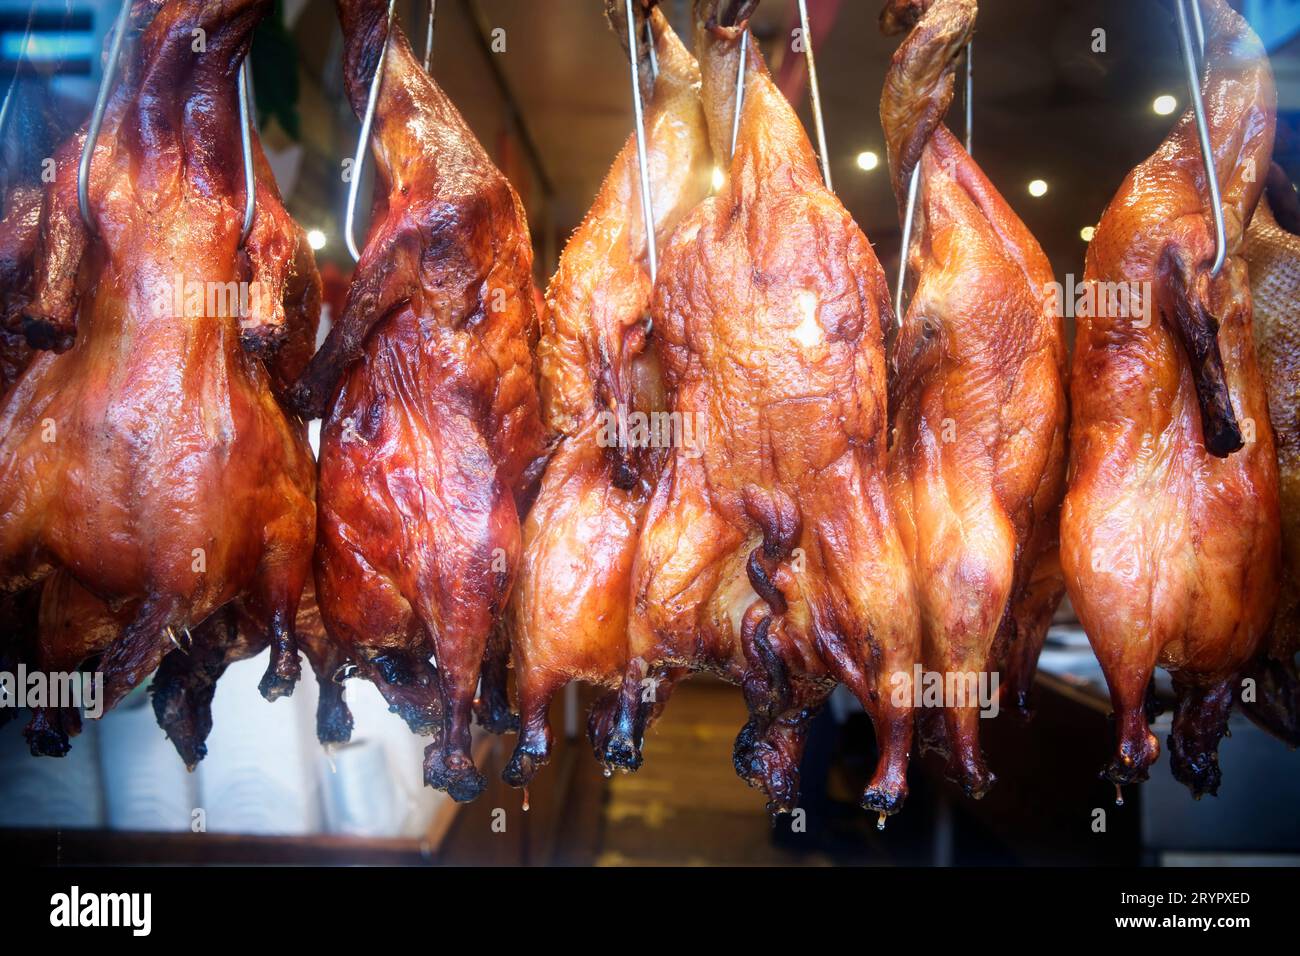 Close up of hanging roasted chickens in a store front window, Chinatown, San Francisco, CA. Stock Photo